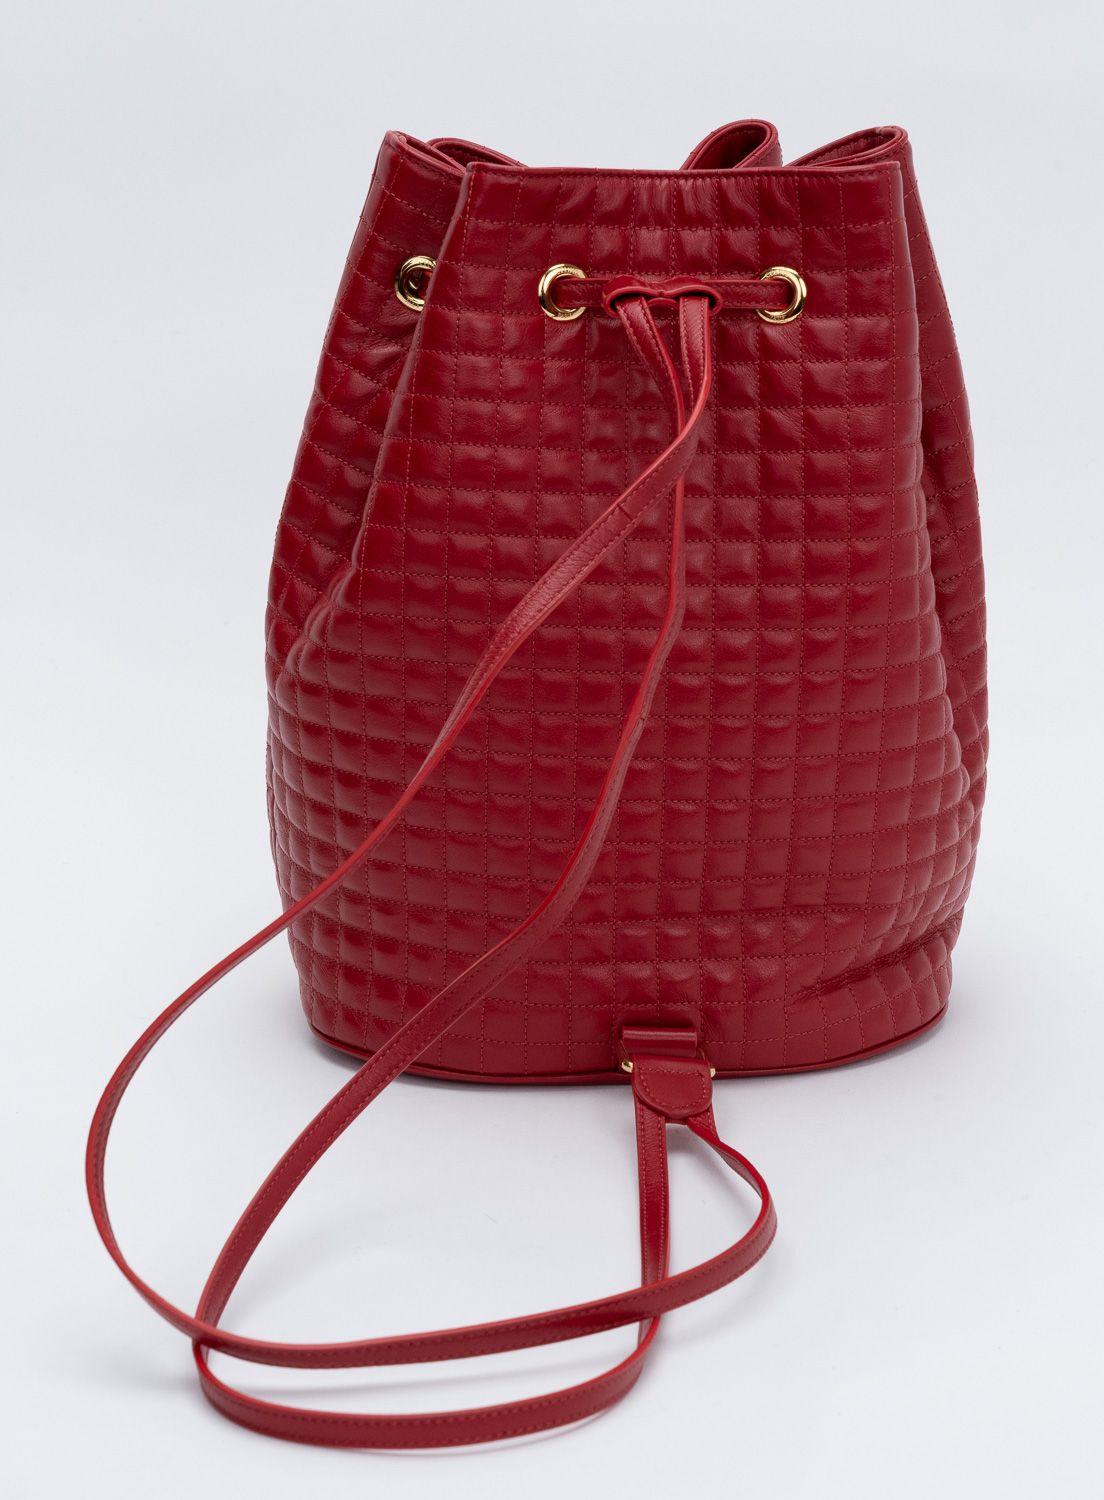 Celine New Red Leather Backpack In New Condition For Sale In West Hollywood, CA